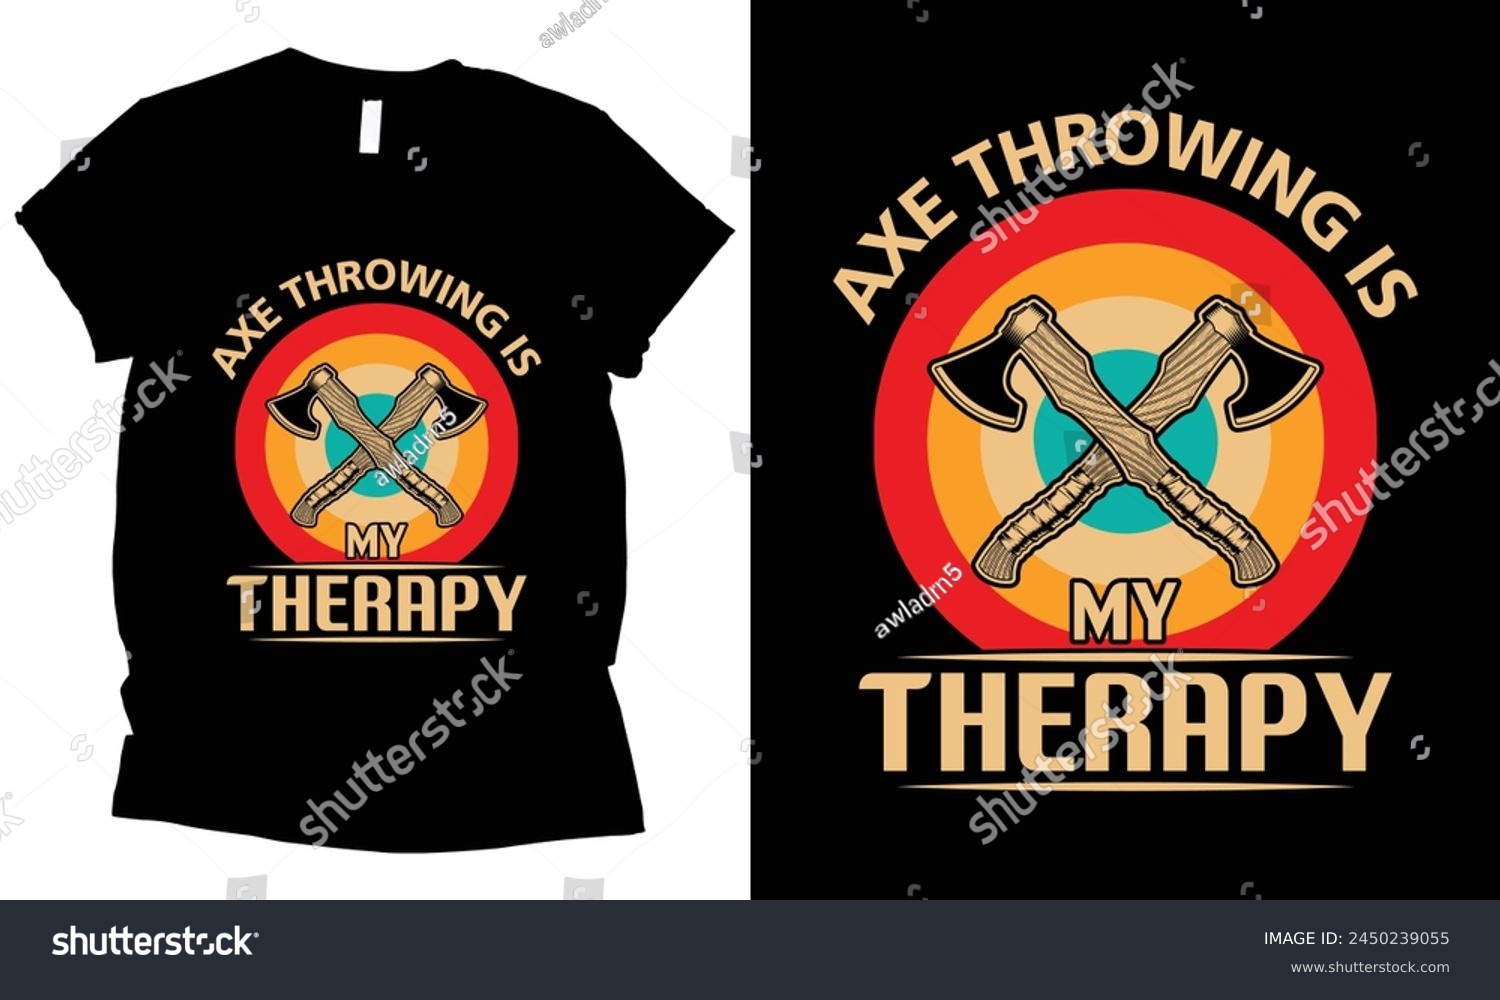 SVG of Axe Throwing is my therapy t-shirt design svg